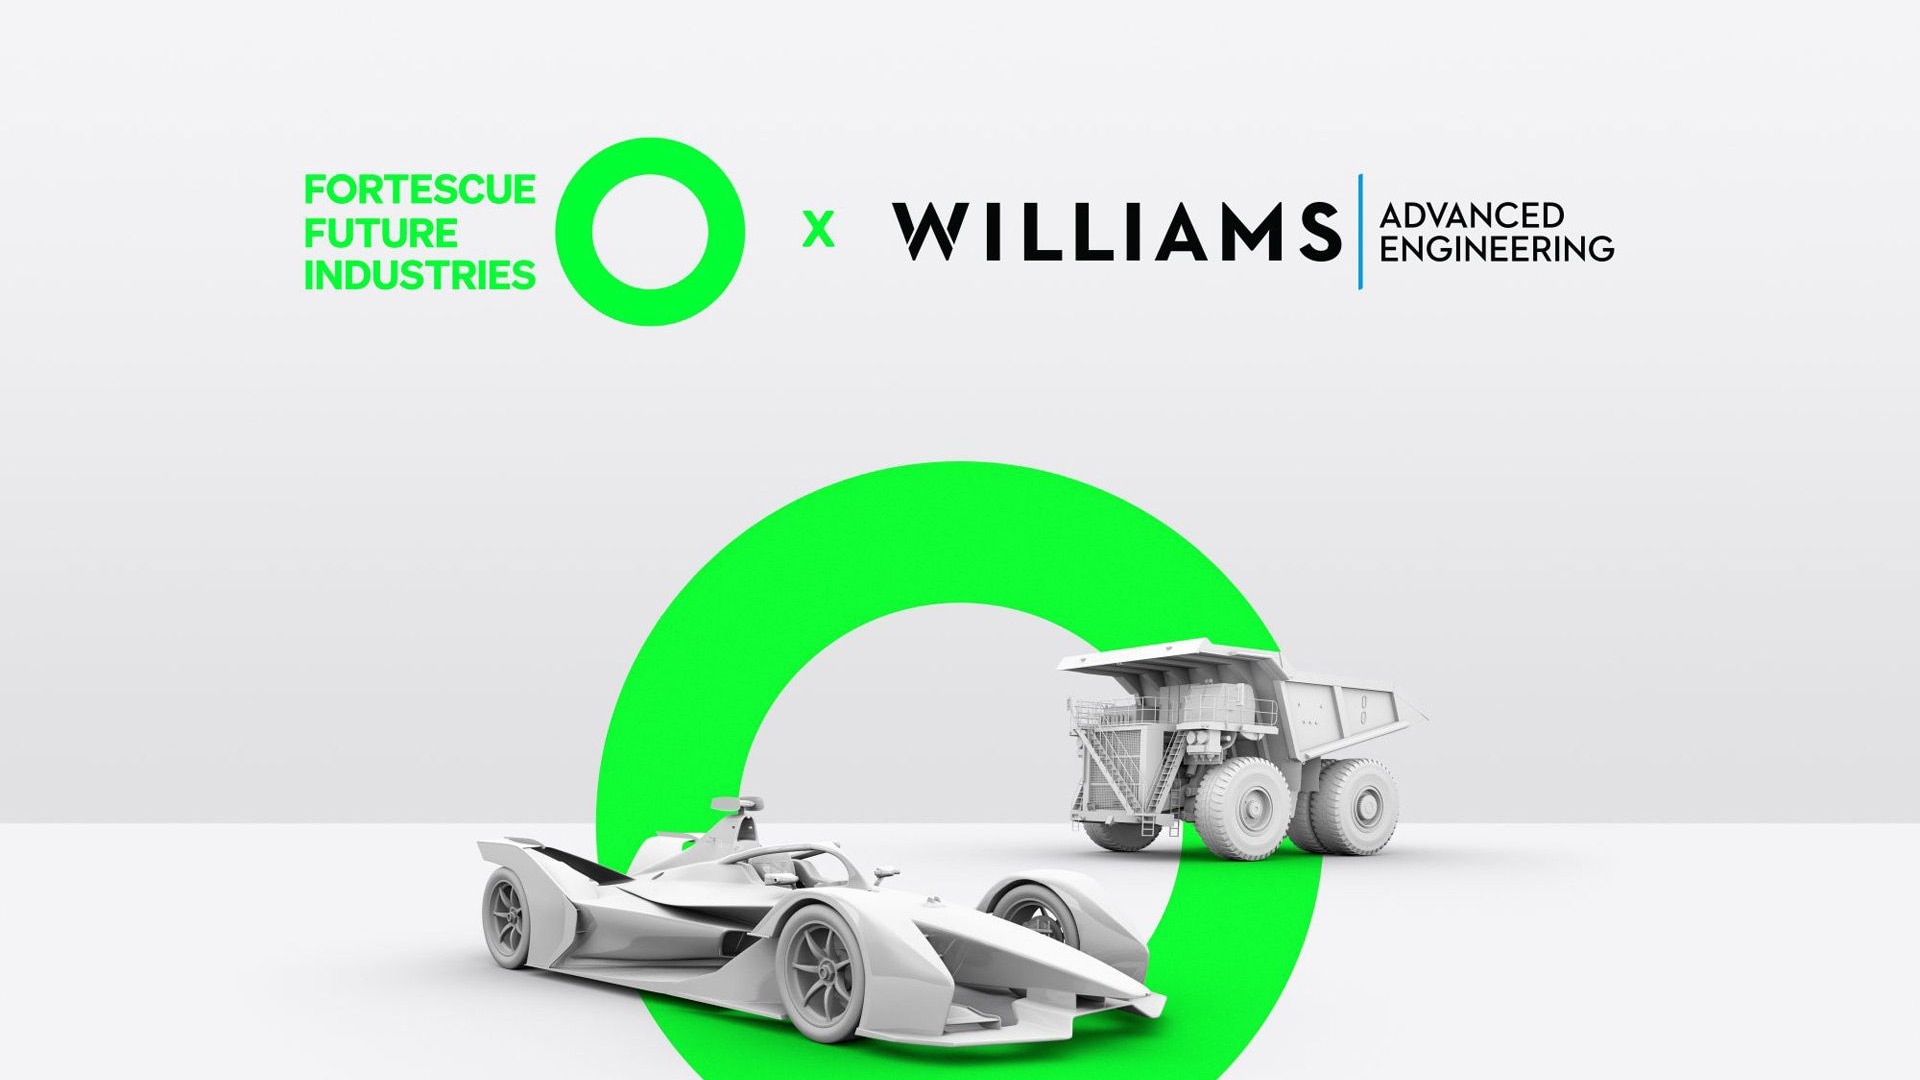 Fortescue Future Industries and Williams Advanced Engineering logos